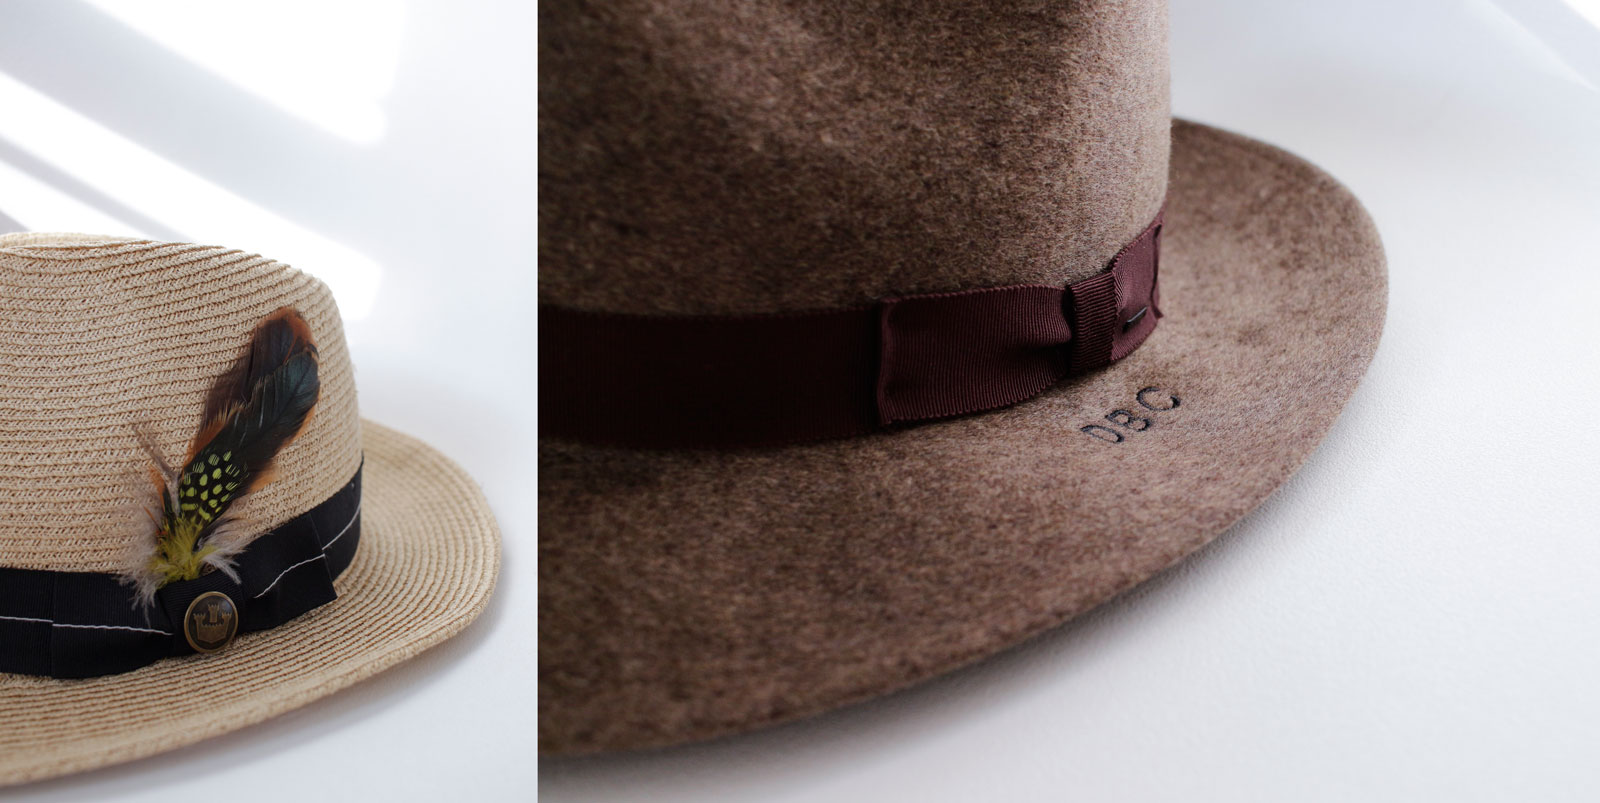 hat detail closeups - Everything You Need To Know About Fedoras